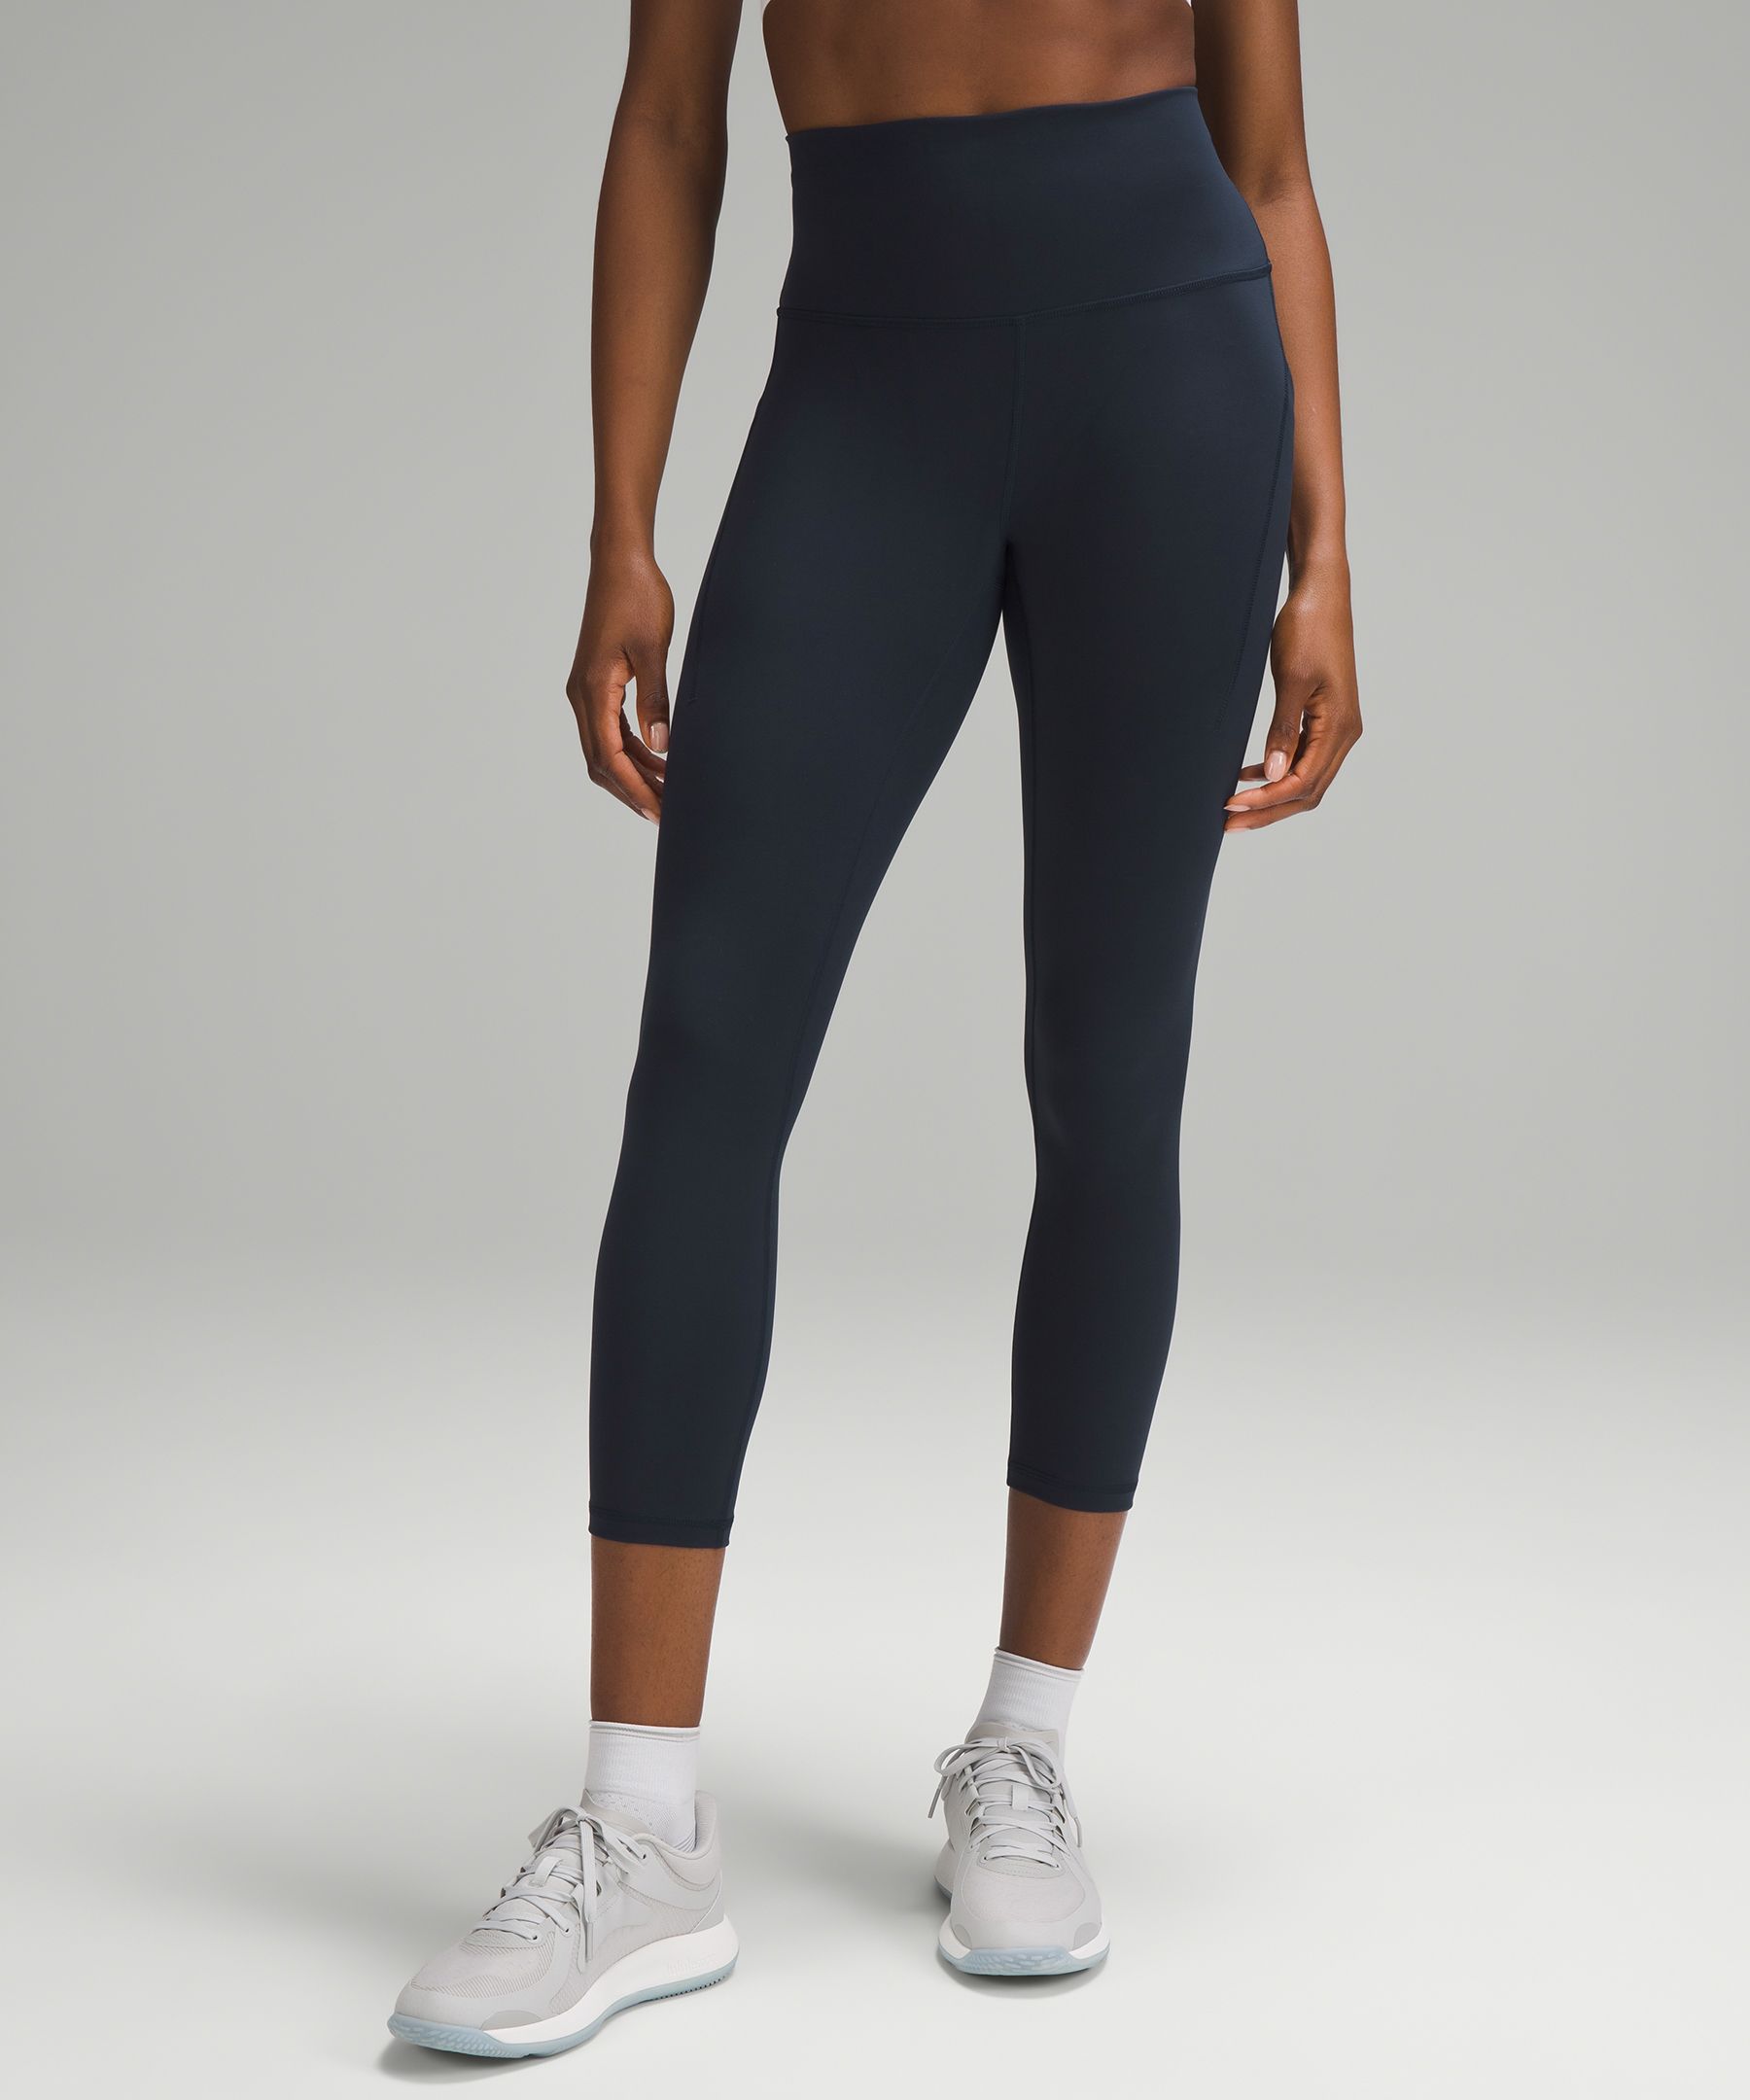 lululemon Wunder Train: Our review of the new collection, wunder